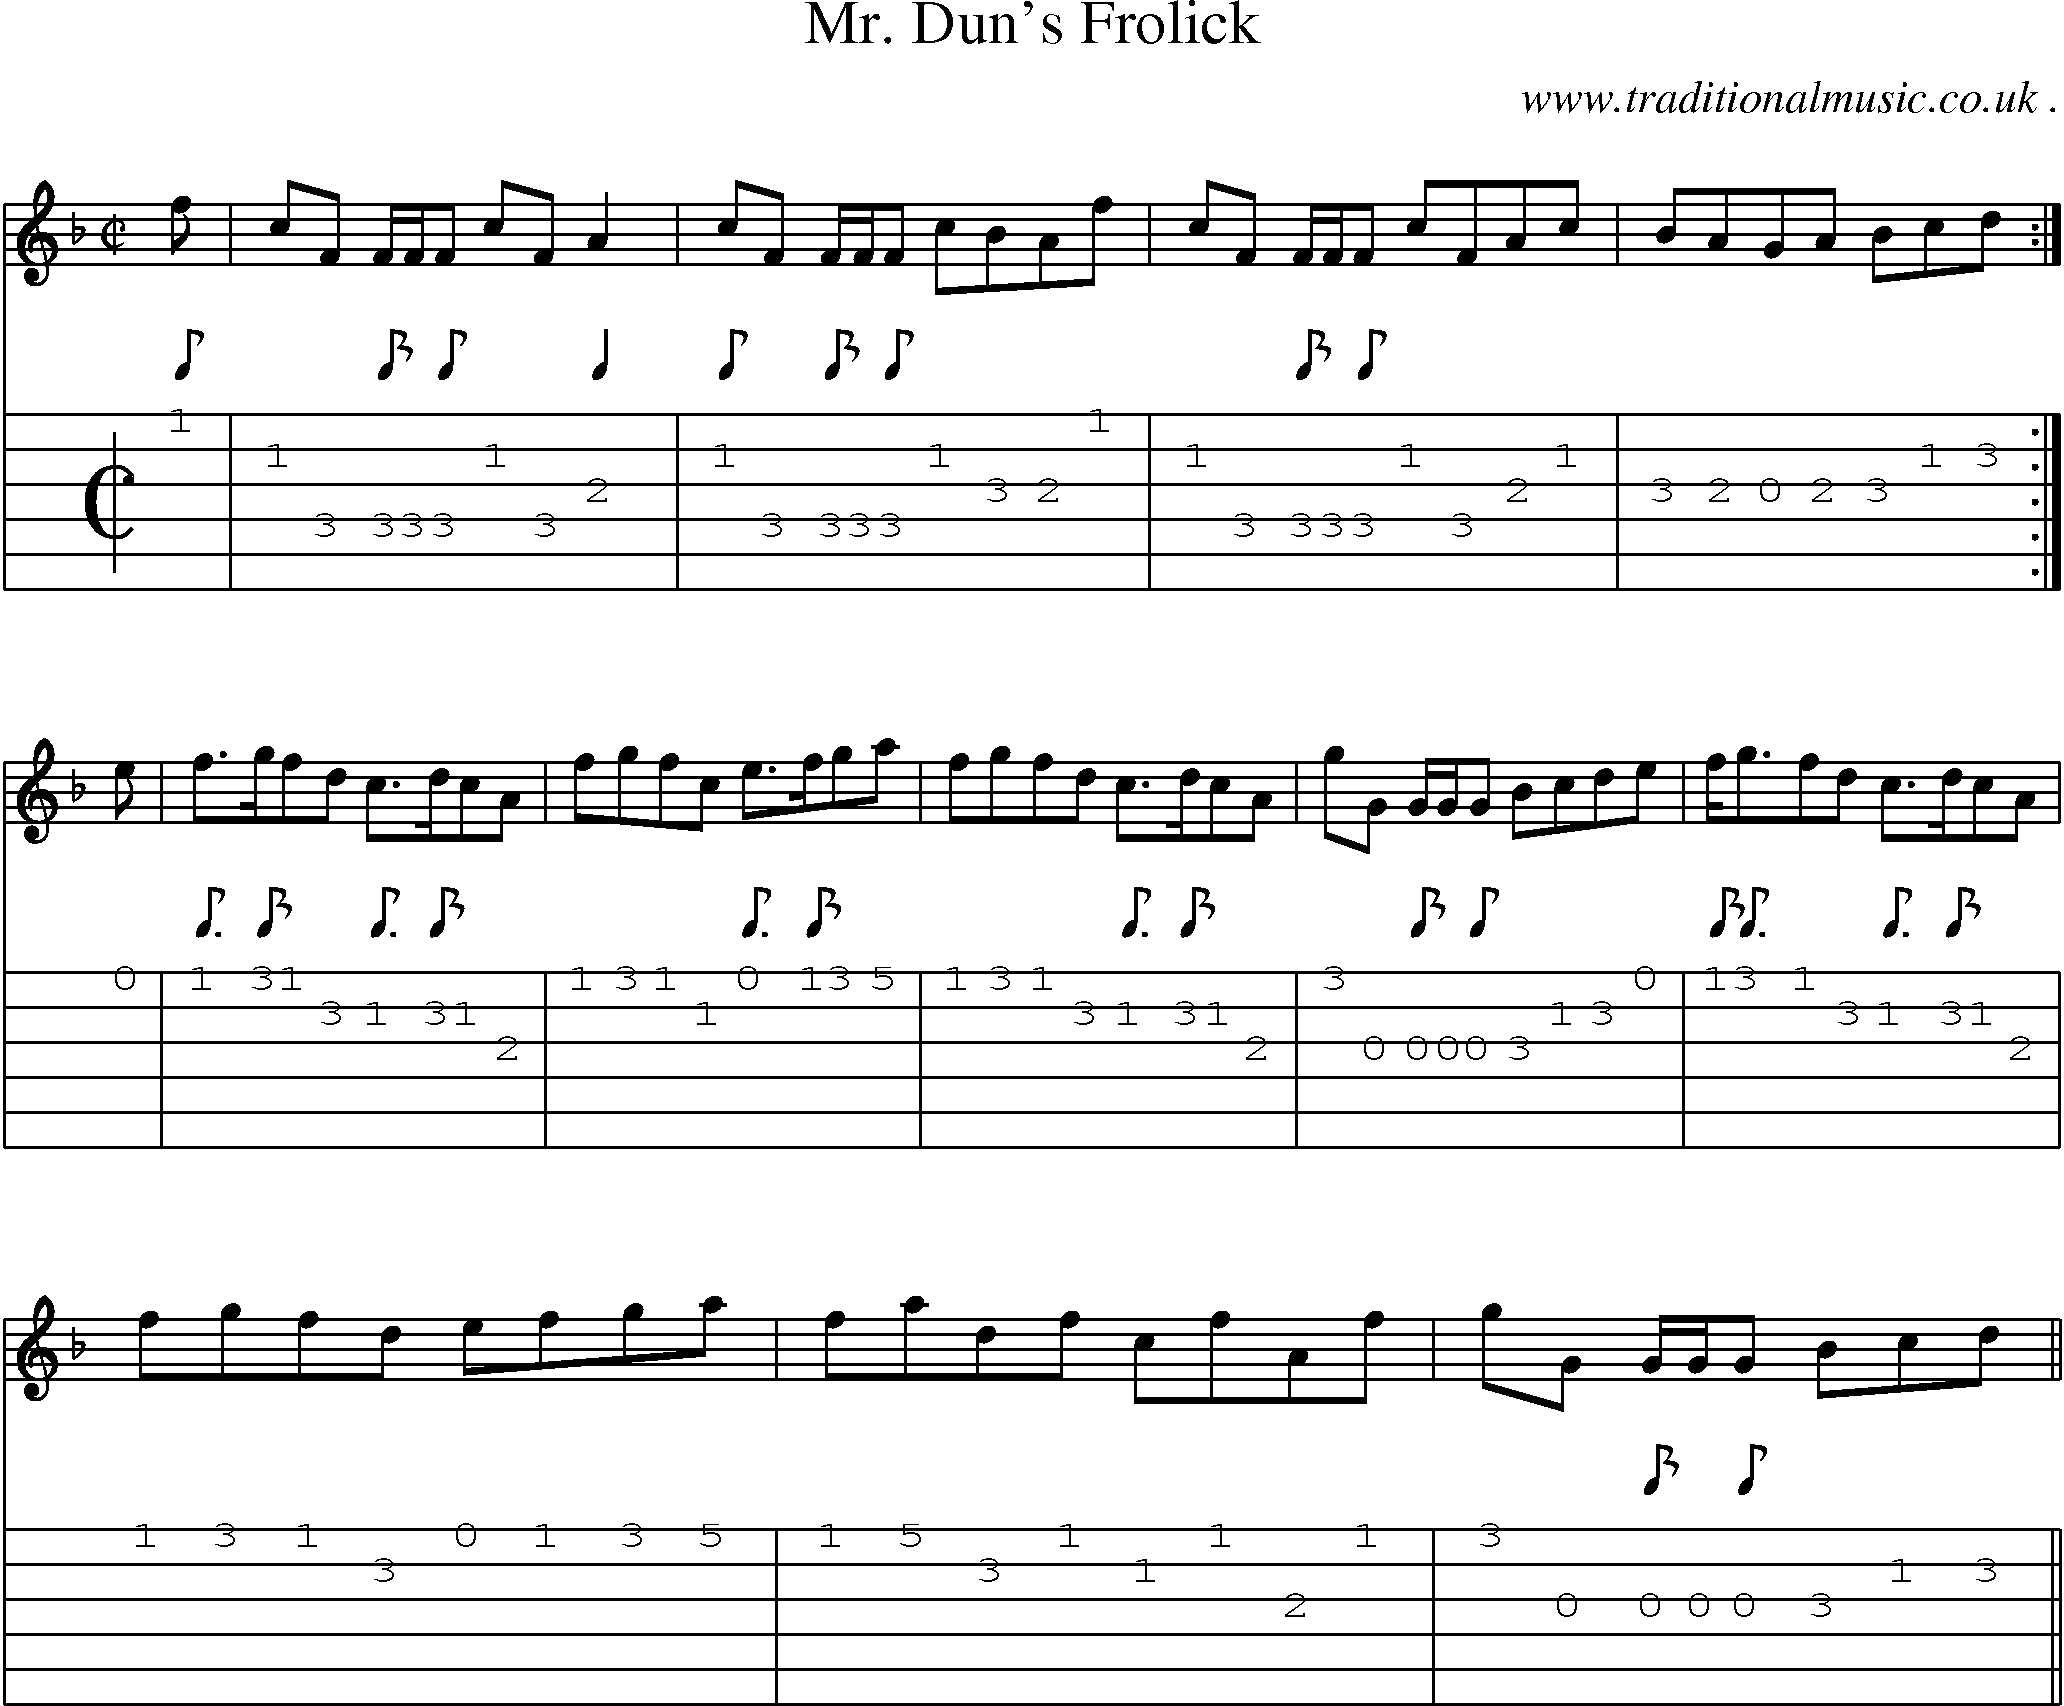 Sheet-music  score, Chords and Guitar Tabs for Mr Duns Frolick